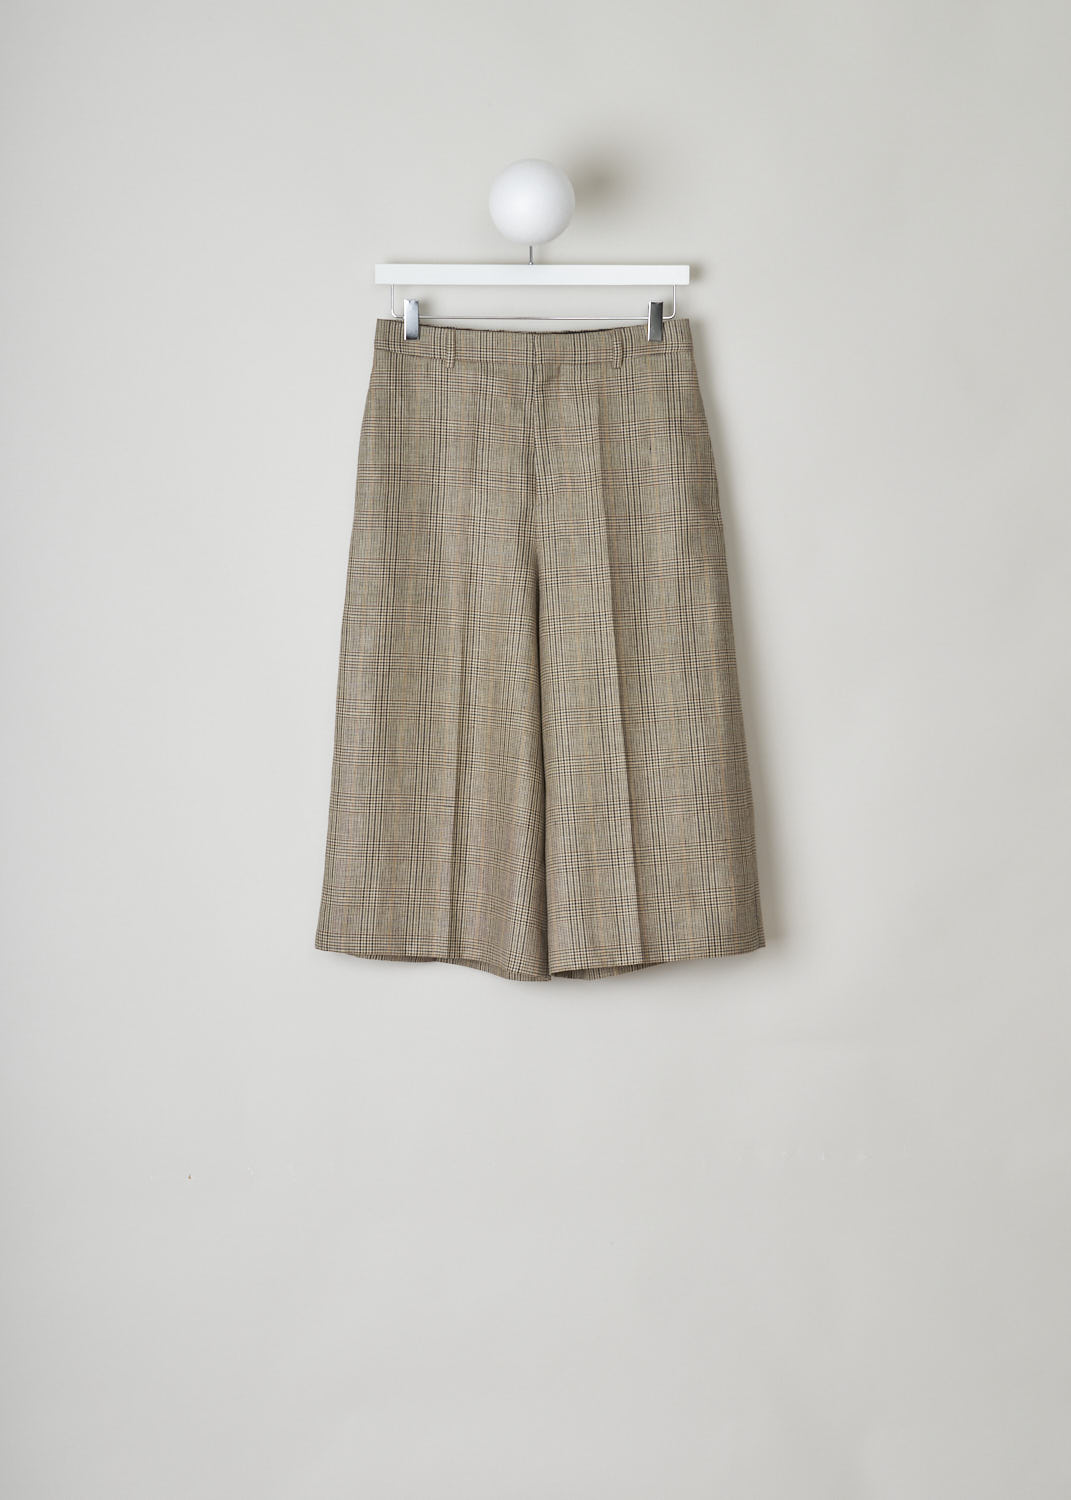 CELINE, BROWN CHECKERED CULOTTES, 024I_2P233_12MC, Brown, Front, Brown checkered culottes made from wool. These pants have belt loops and the closing option on this model is a concealed hook, button and zipper. Along the length of the pant legs, creases can be found. These pants have slanted pockets in the front and two buttoned welt pockets in the back.

